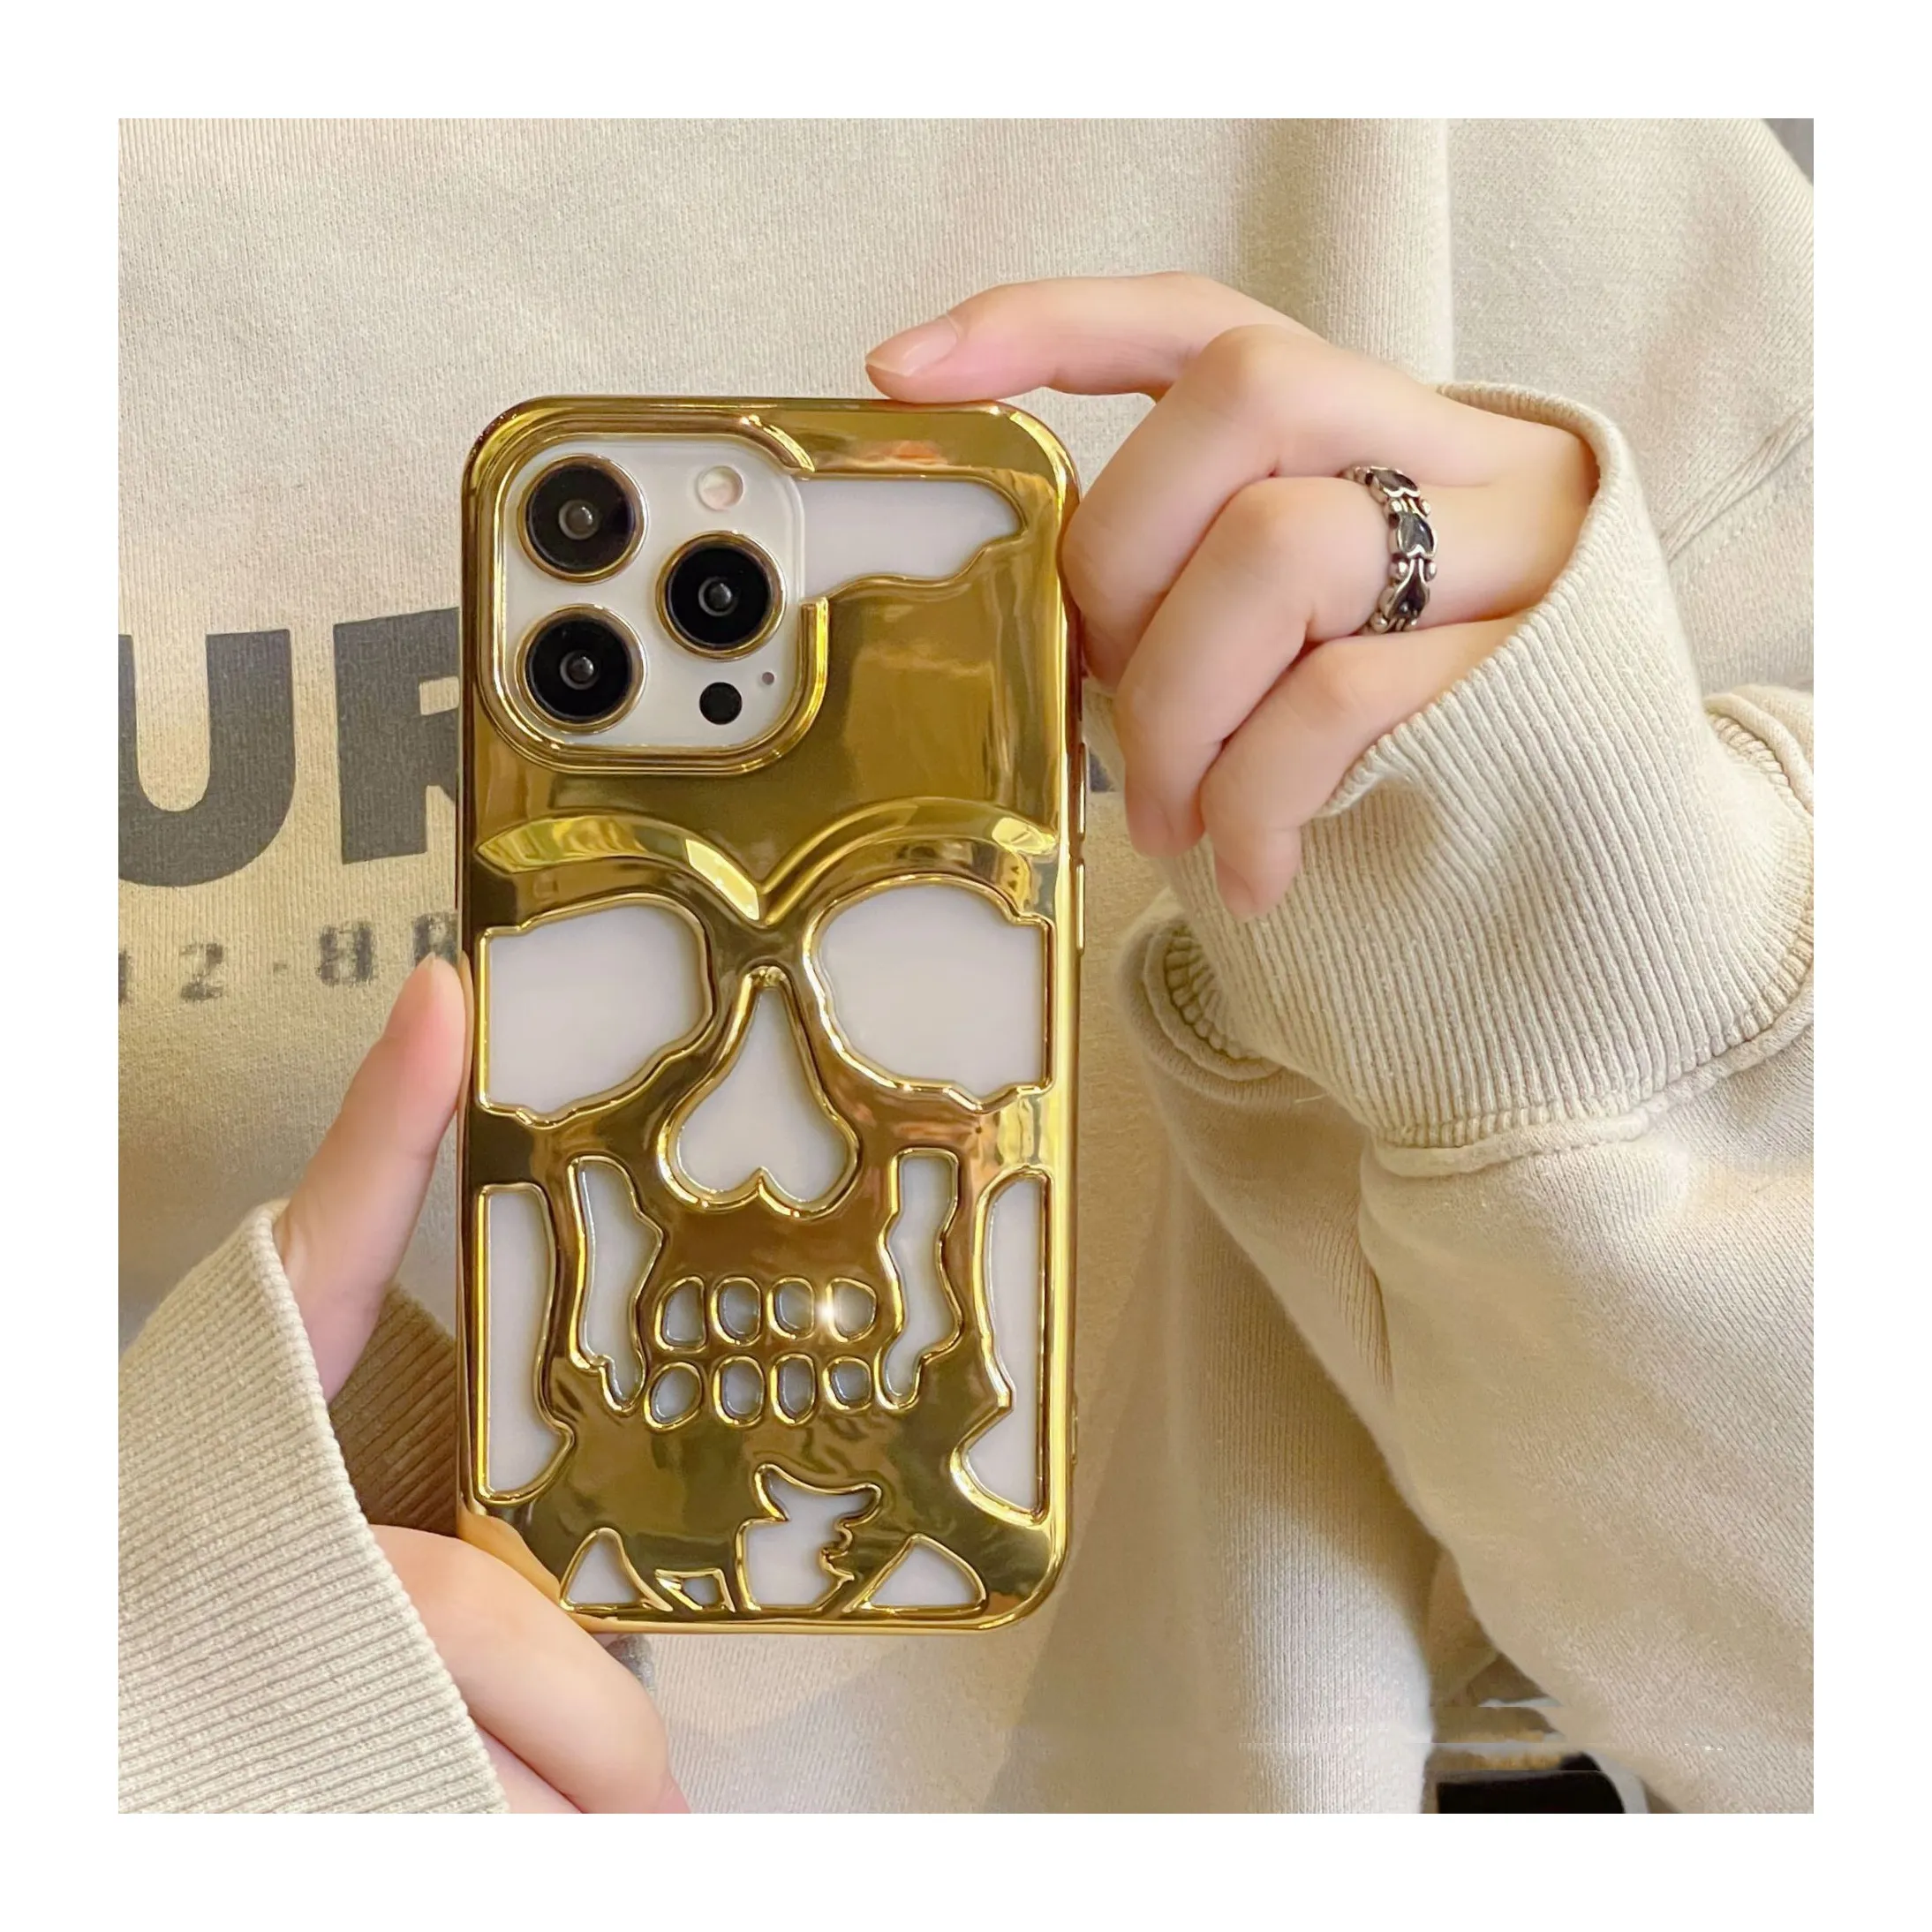 Design Anti-drop Mobile Phone Case 2023 New Design Skull Shockproof Phone Case, Creative for Iphone Protective Cover Flexi